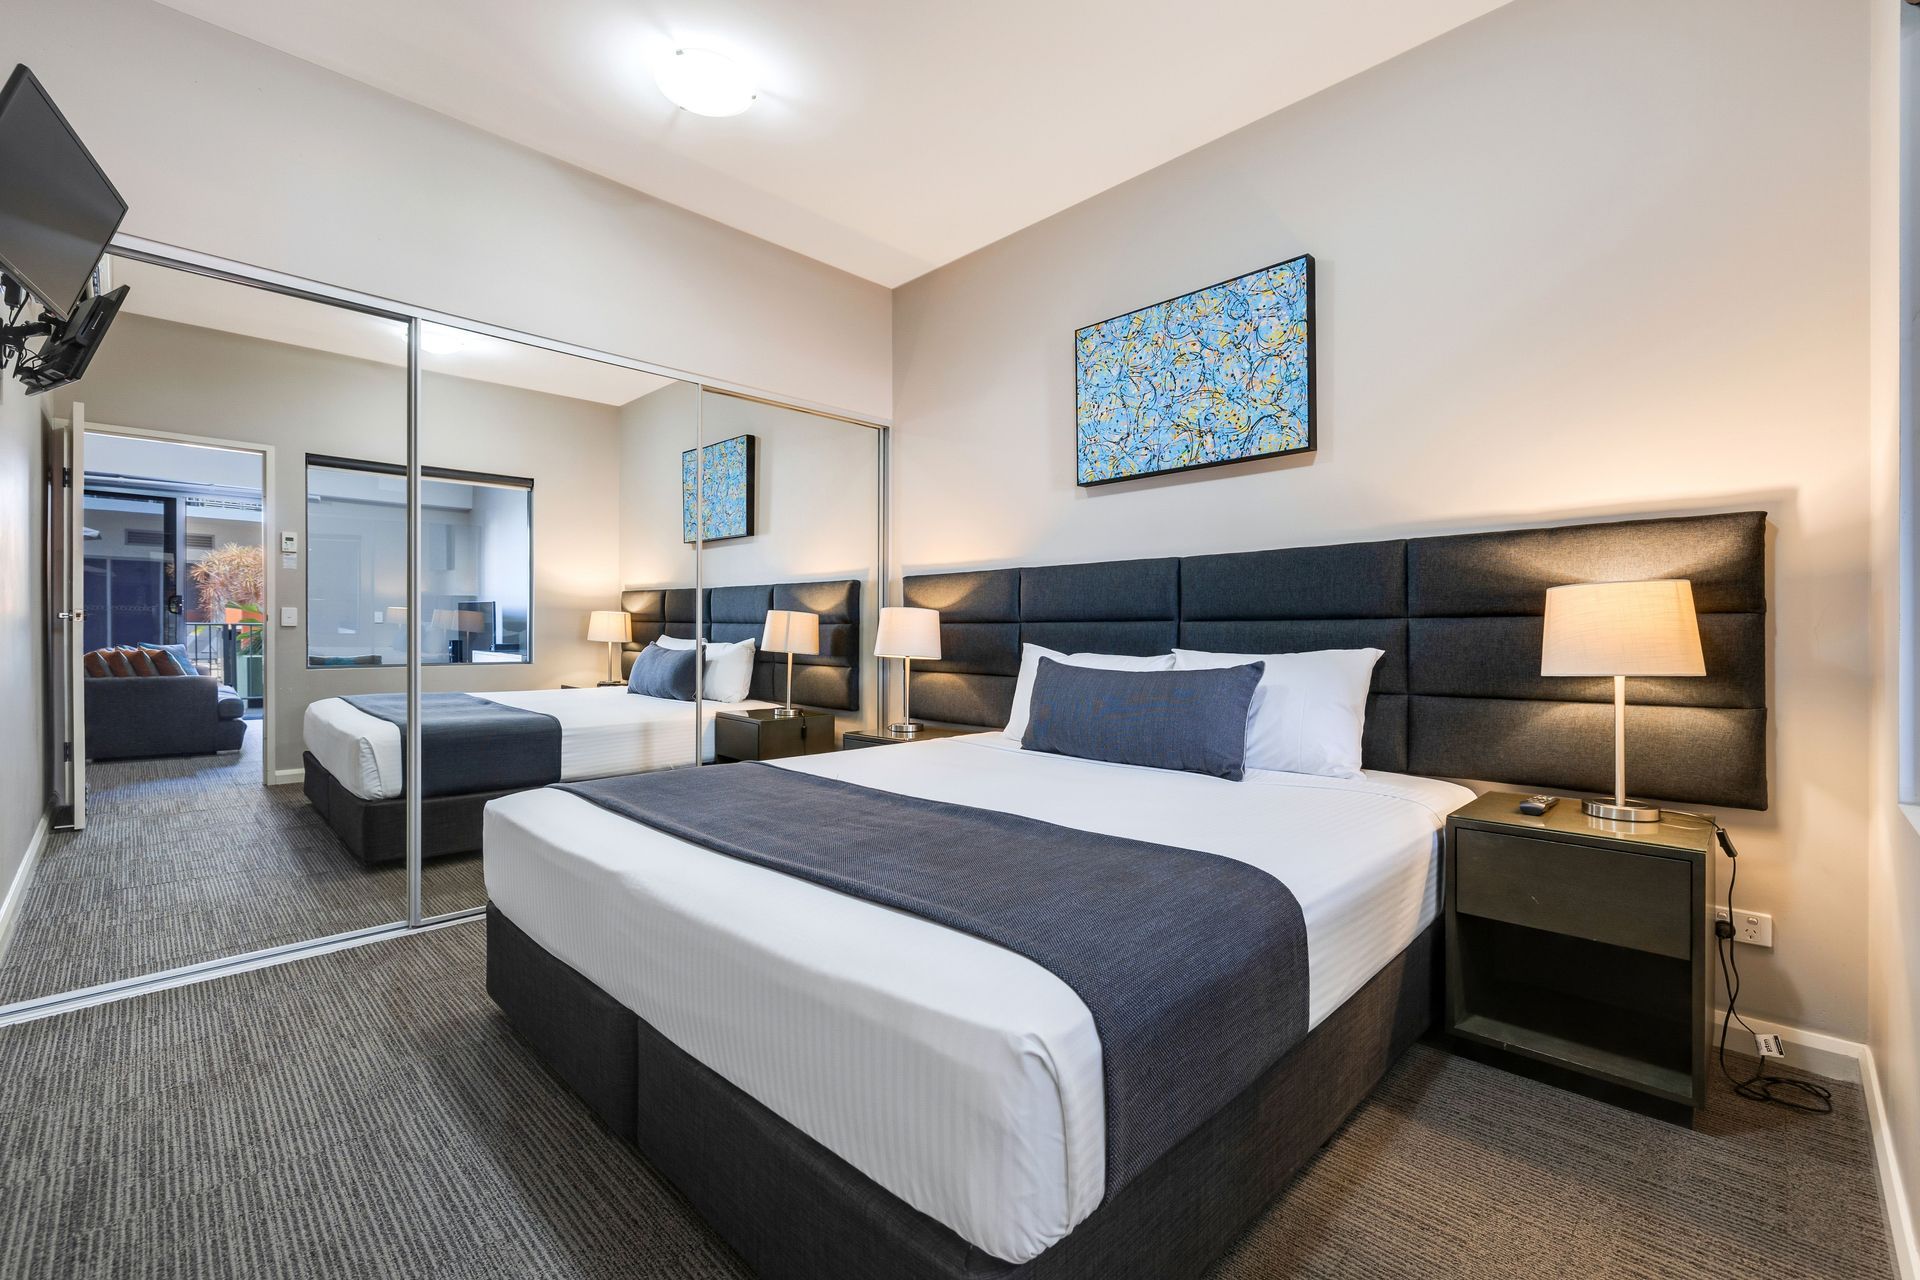 The Comforts of a Serviced Apartment Experience in Berrimah